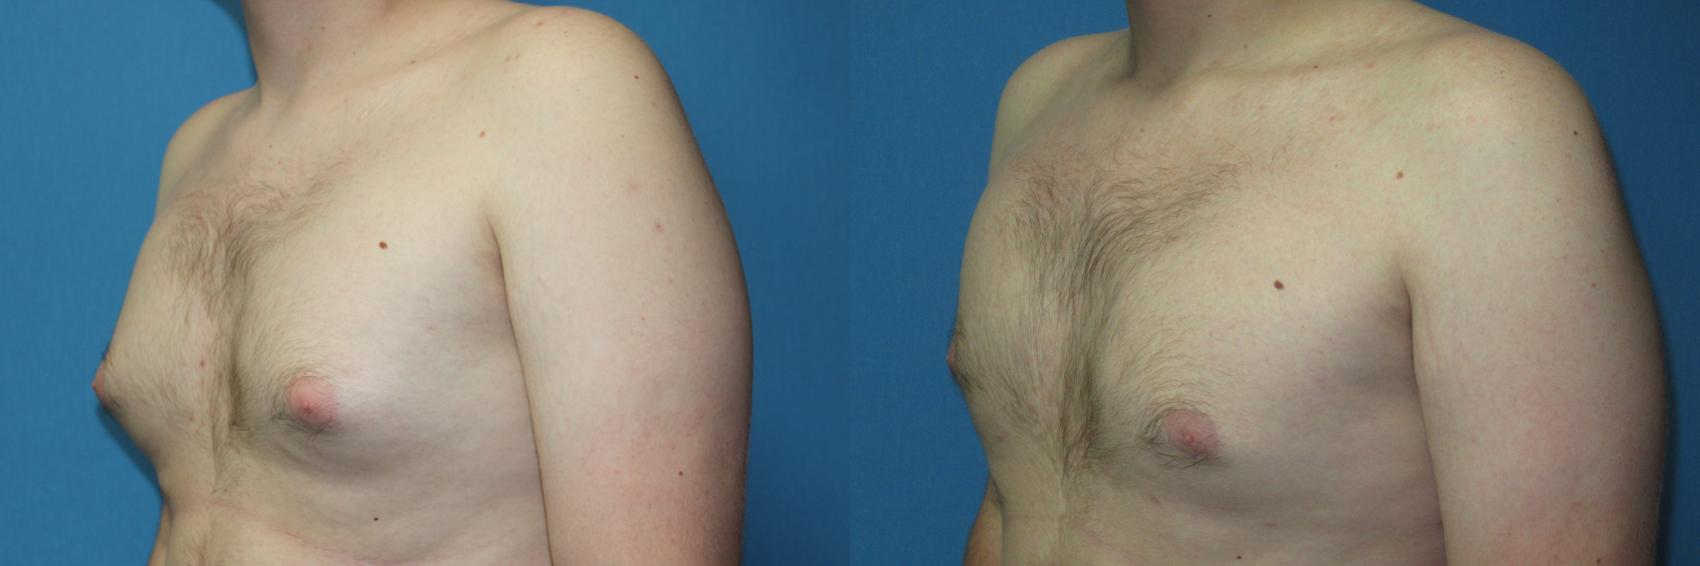 Before & After Liposuction - Male Chest Case 170 Left Oblique View in Coeur d'Alene, ID